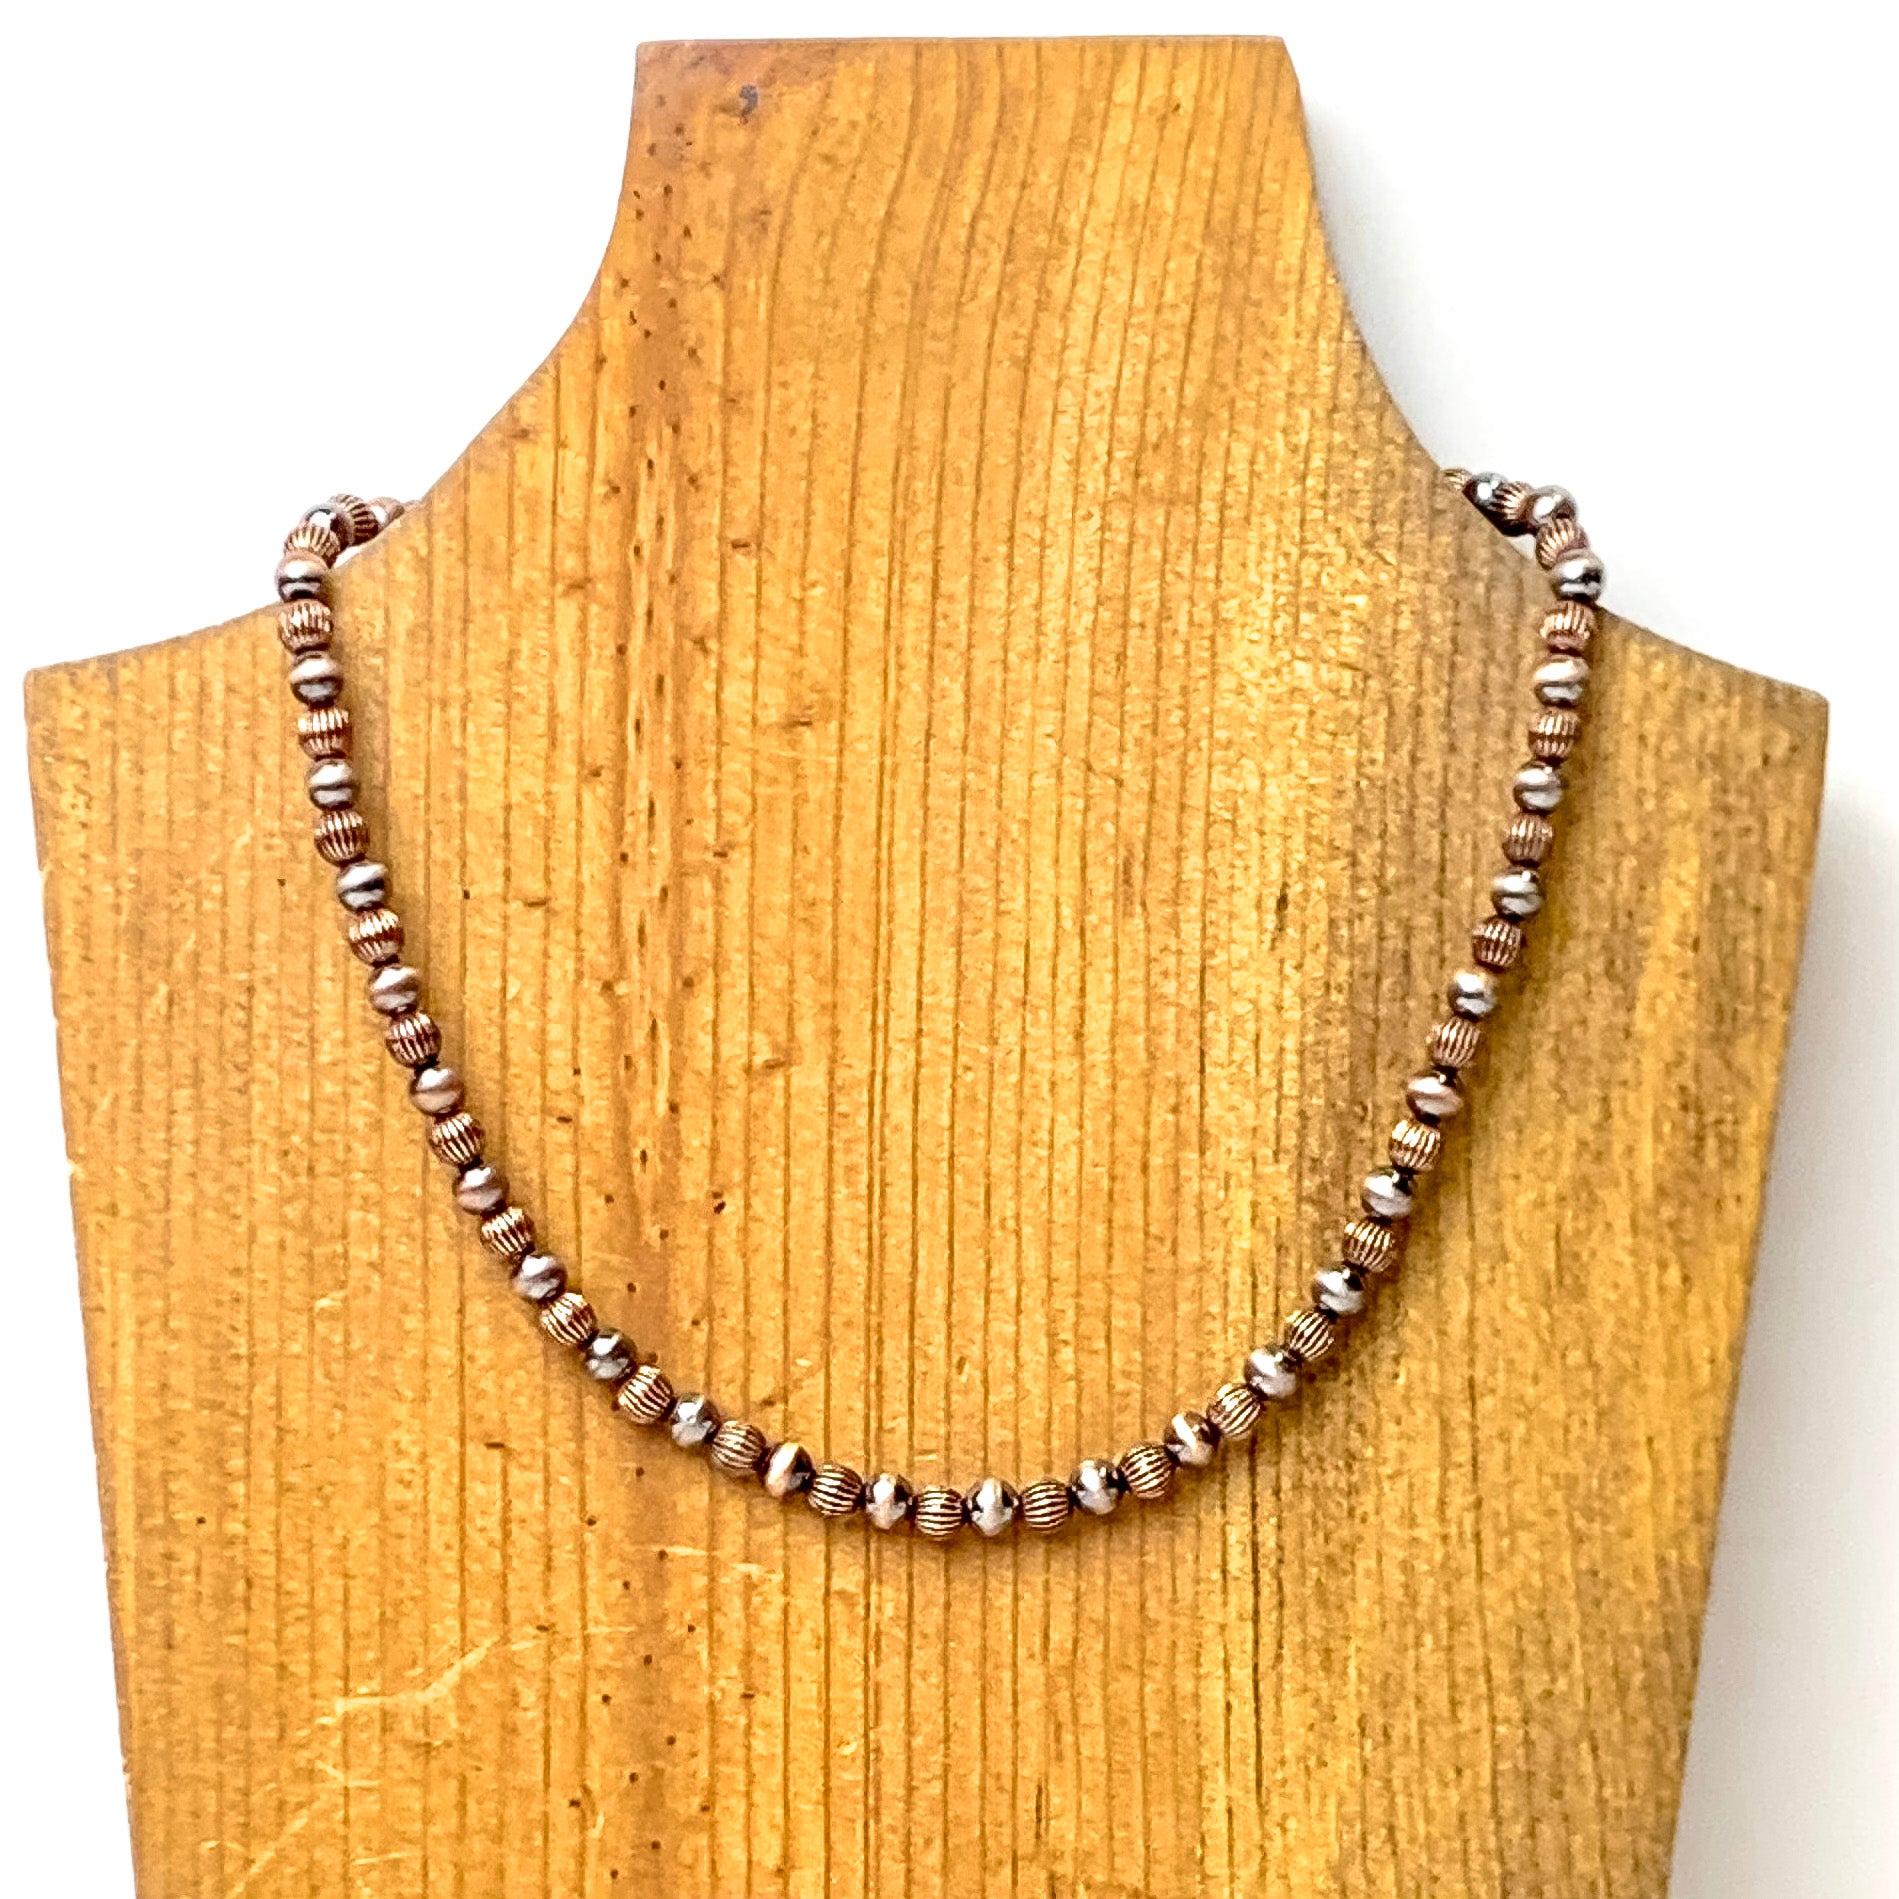 Faux Navajo Pearl Necklace with Corrugated Spacers in Copper Tone - Giddy Up Glamour Boutique